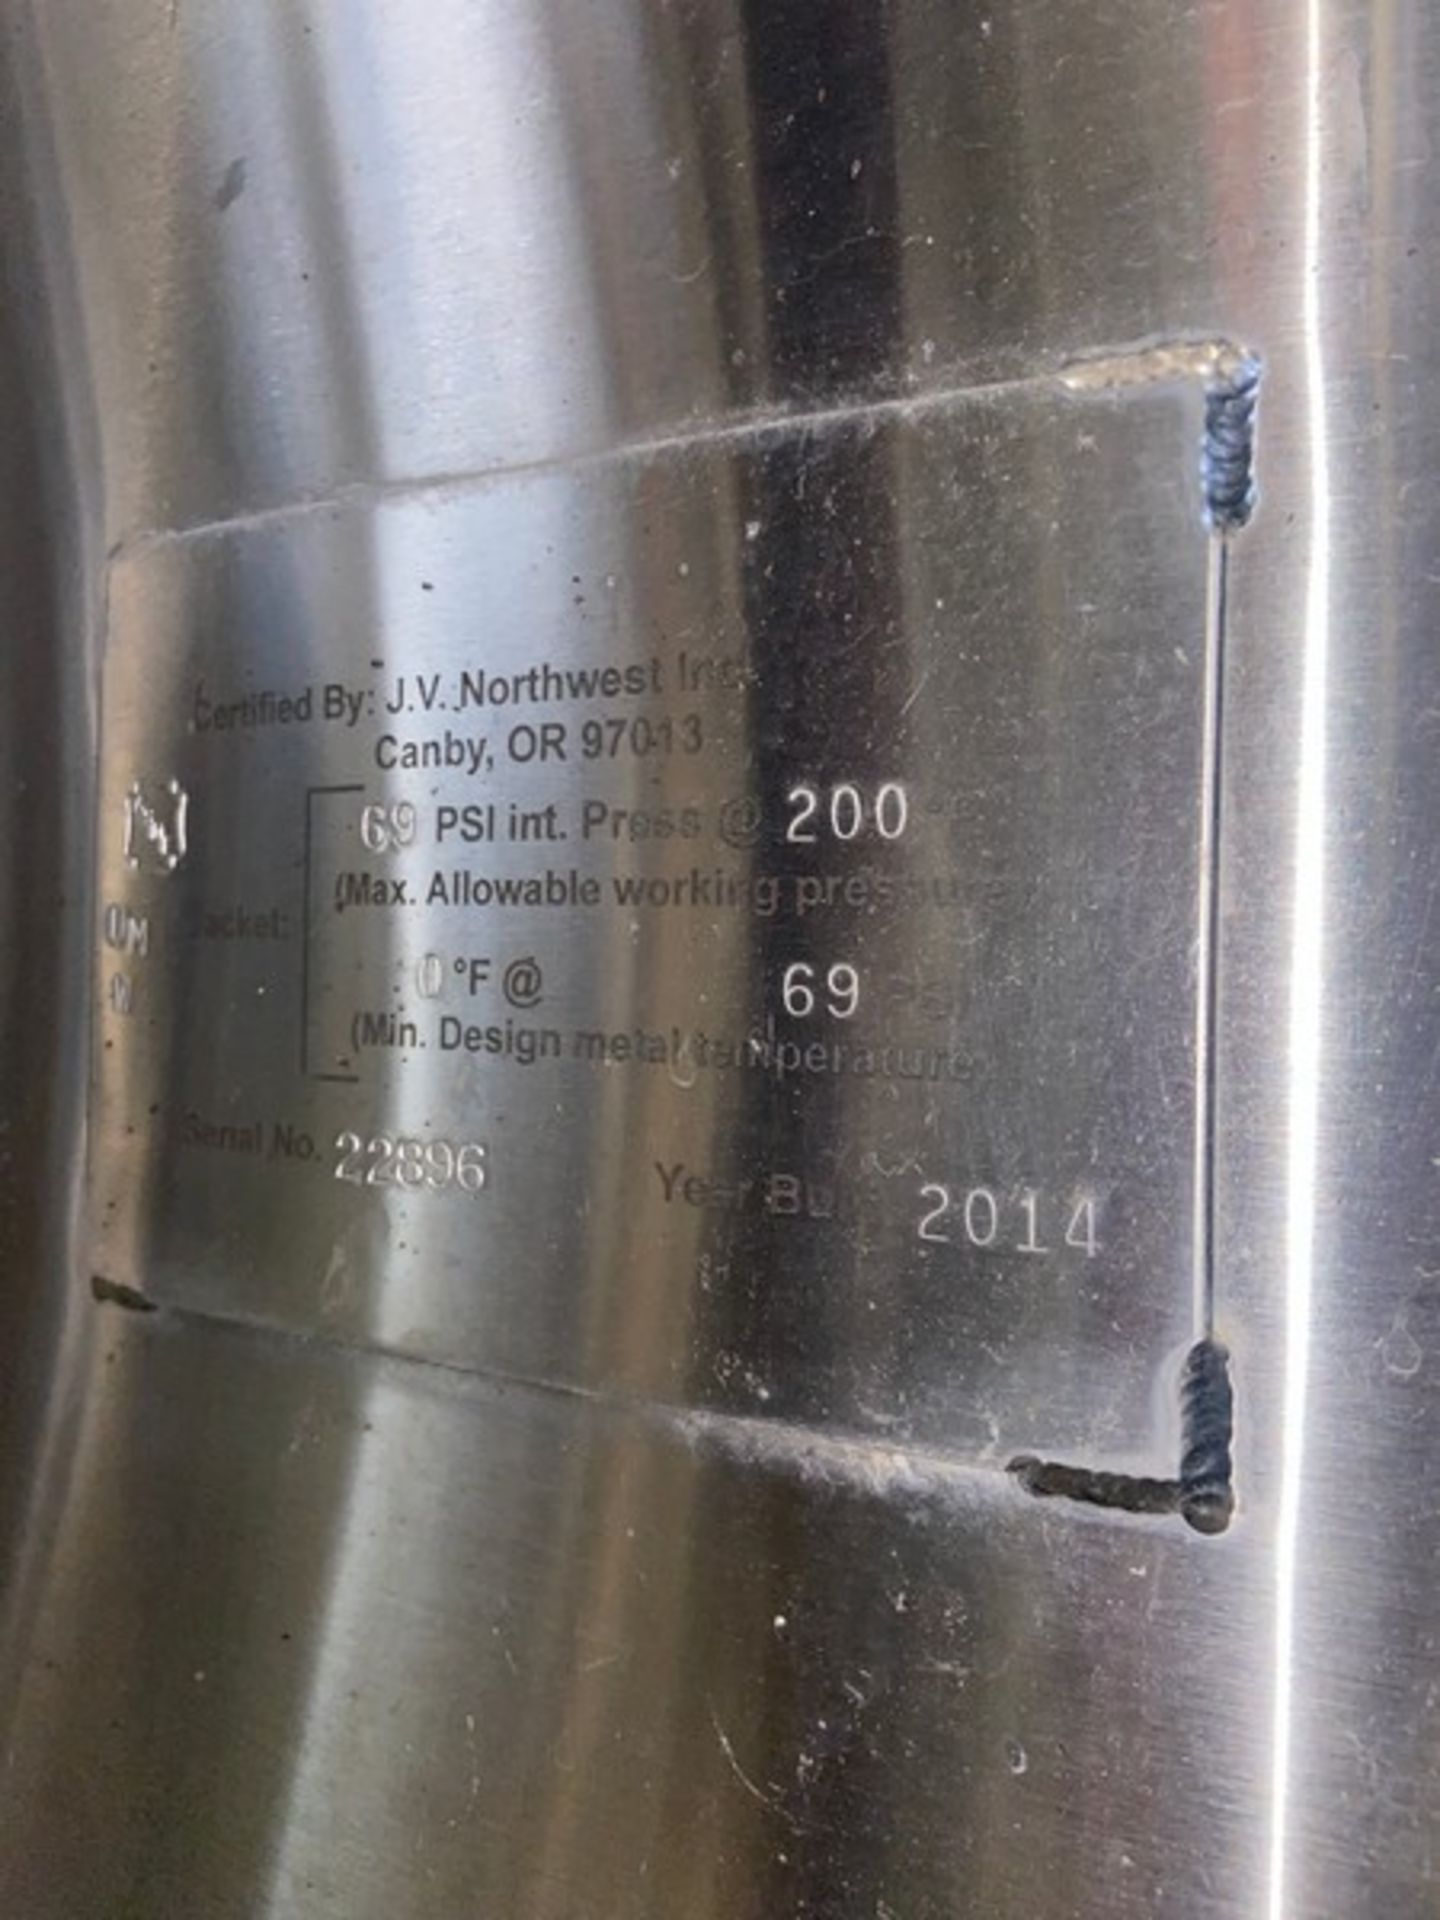 2014 JVNW 15 BBL(465 GAL.) S/S Jacketed Vertical Tank, S/N 22896, 69 PSI Int. Press @ 200 F, 0 F @ 6 - Image 12 of 13